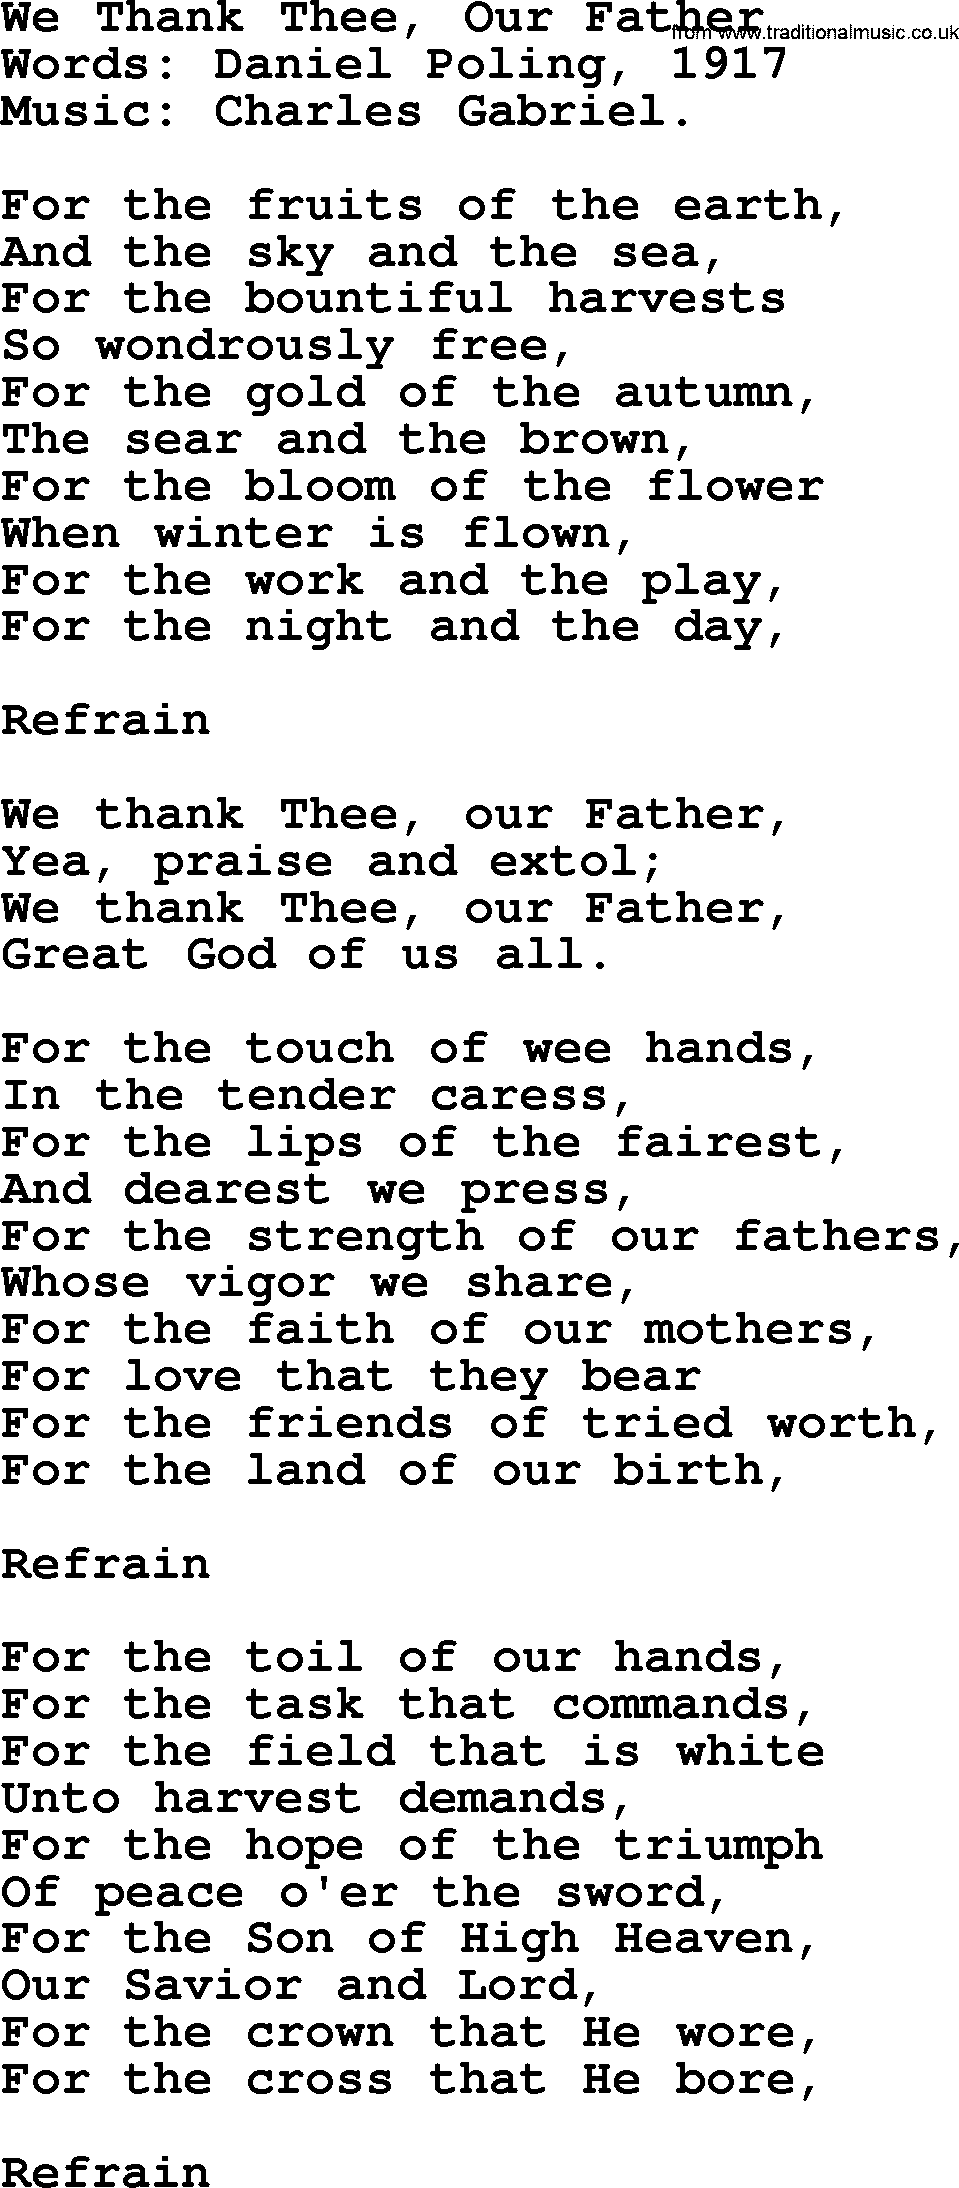 Thanksgiving Hymns and Songs: We Thank Thee, Our Father lyrics with PDF